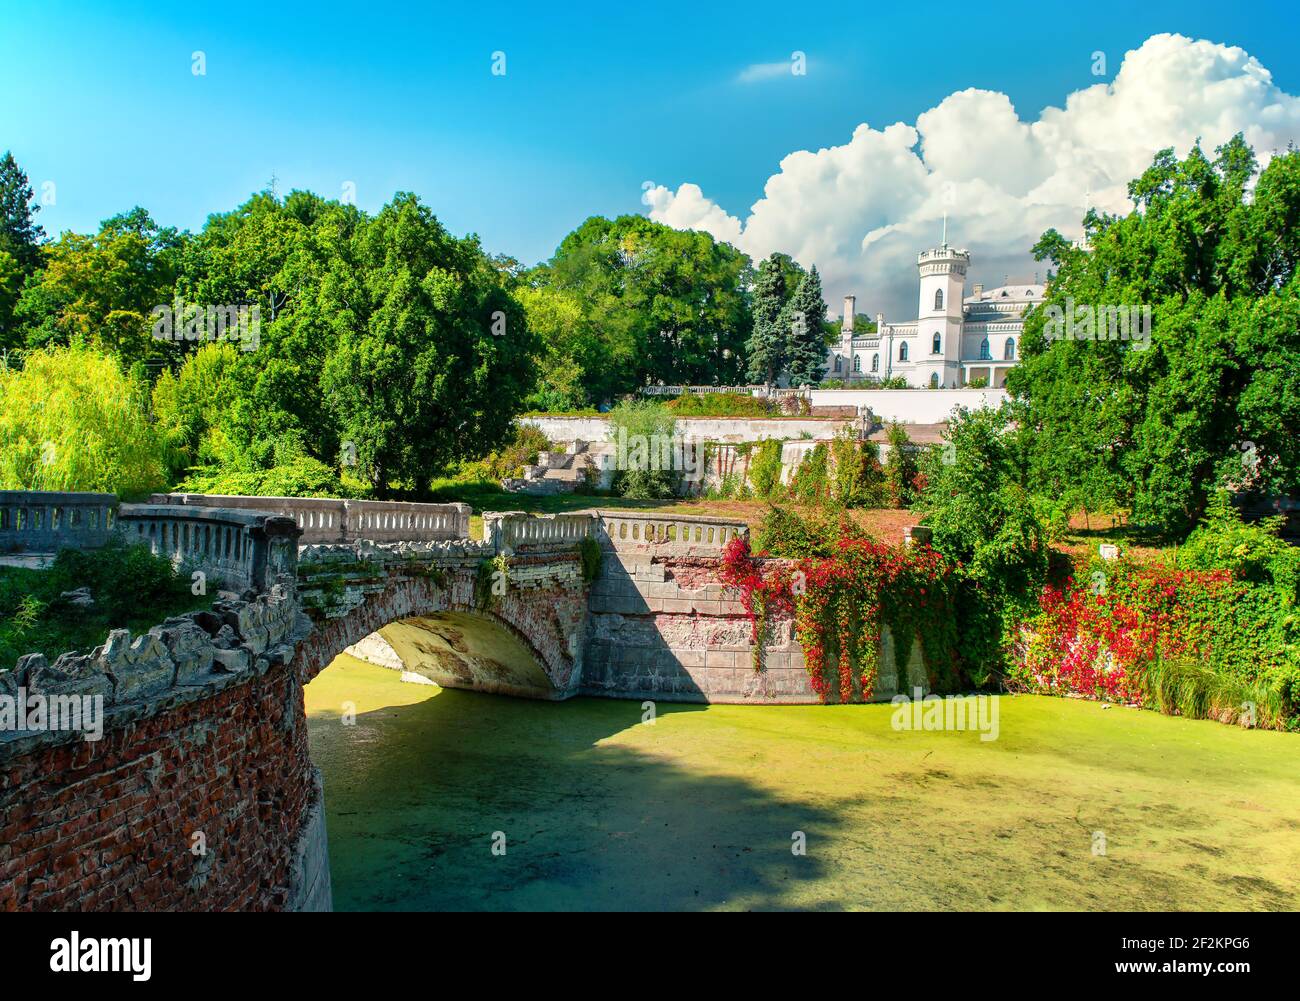 Beautiful view of Sharovsky Castle building in amazing green park Stock Photo